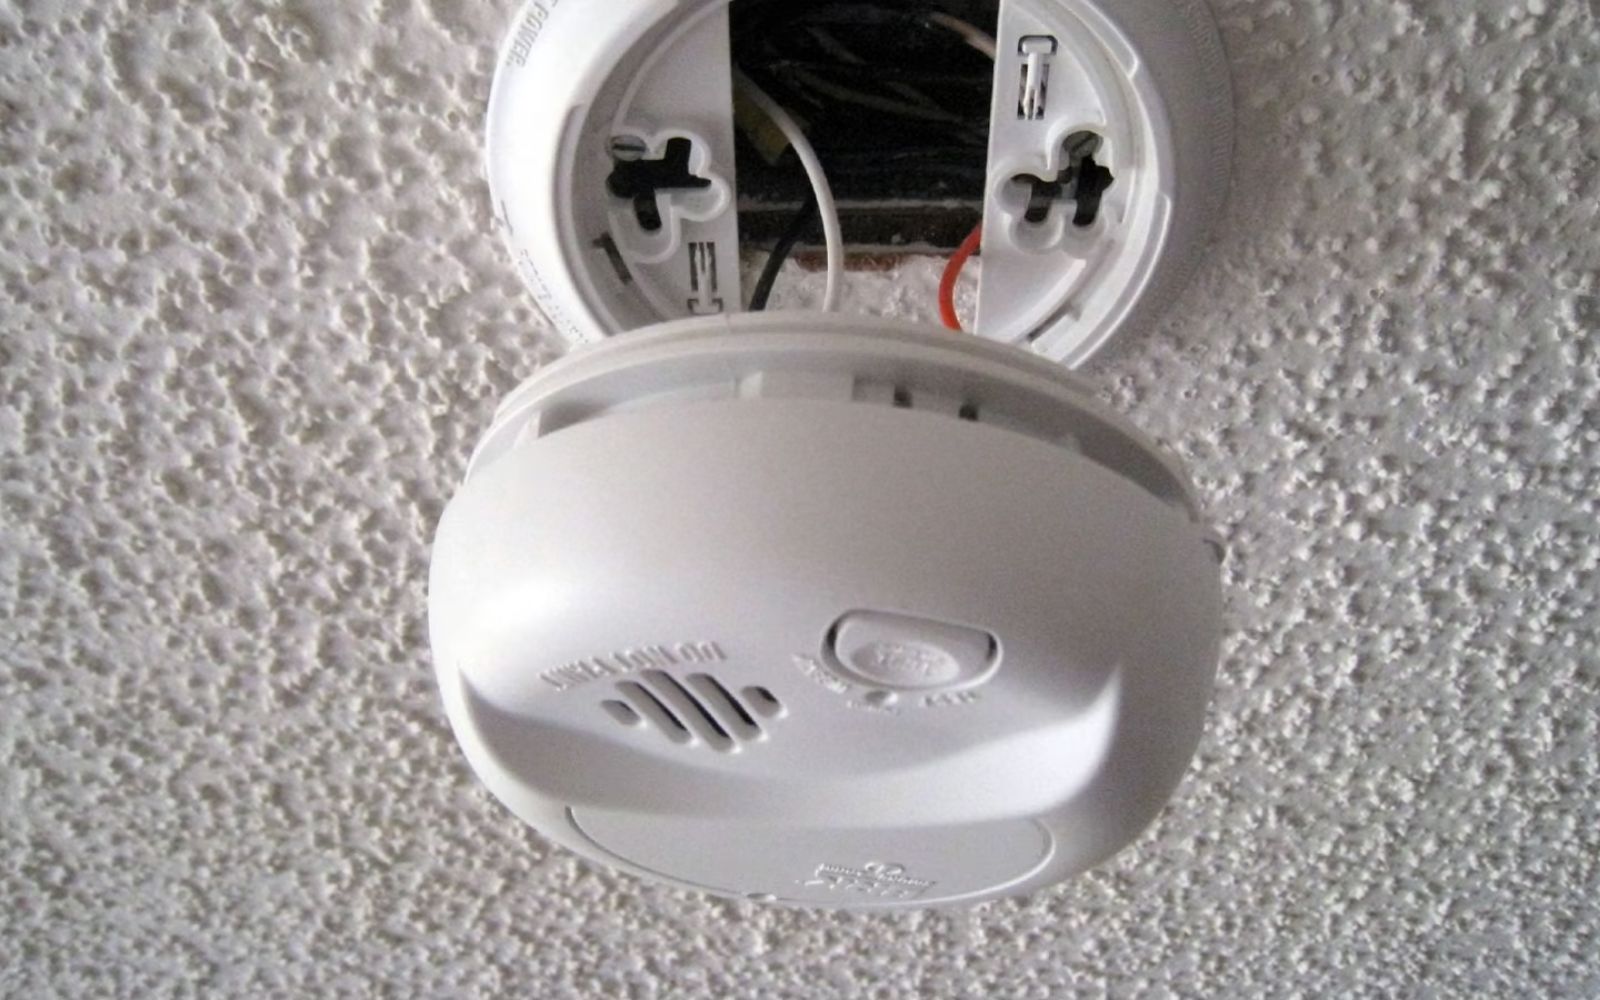 How To Stop A Smoke Detector From Chirping